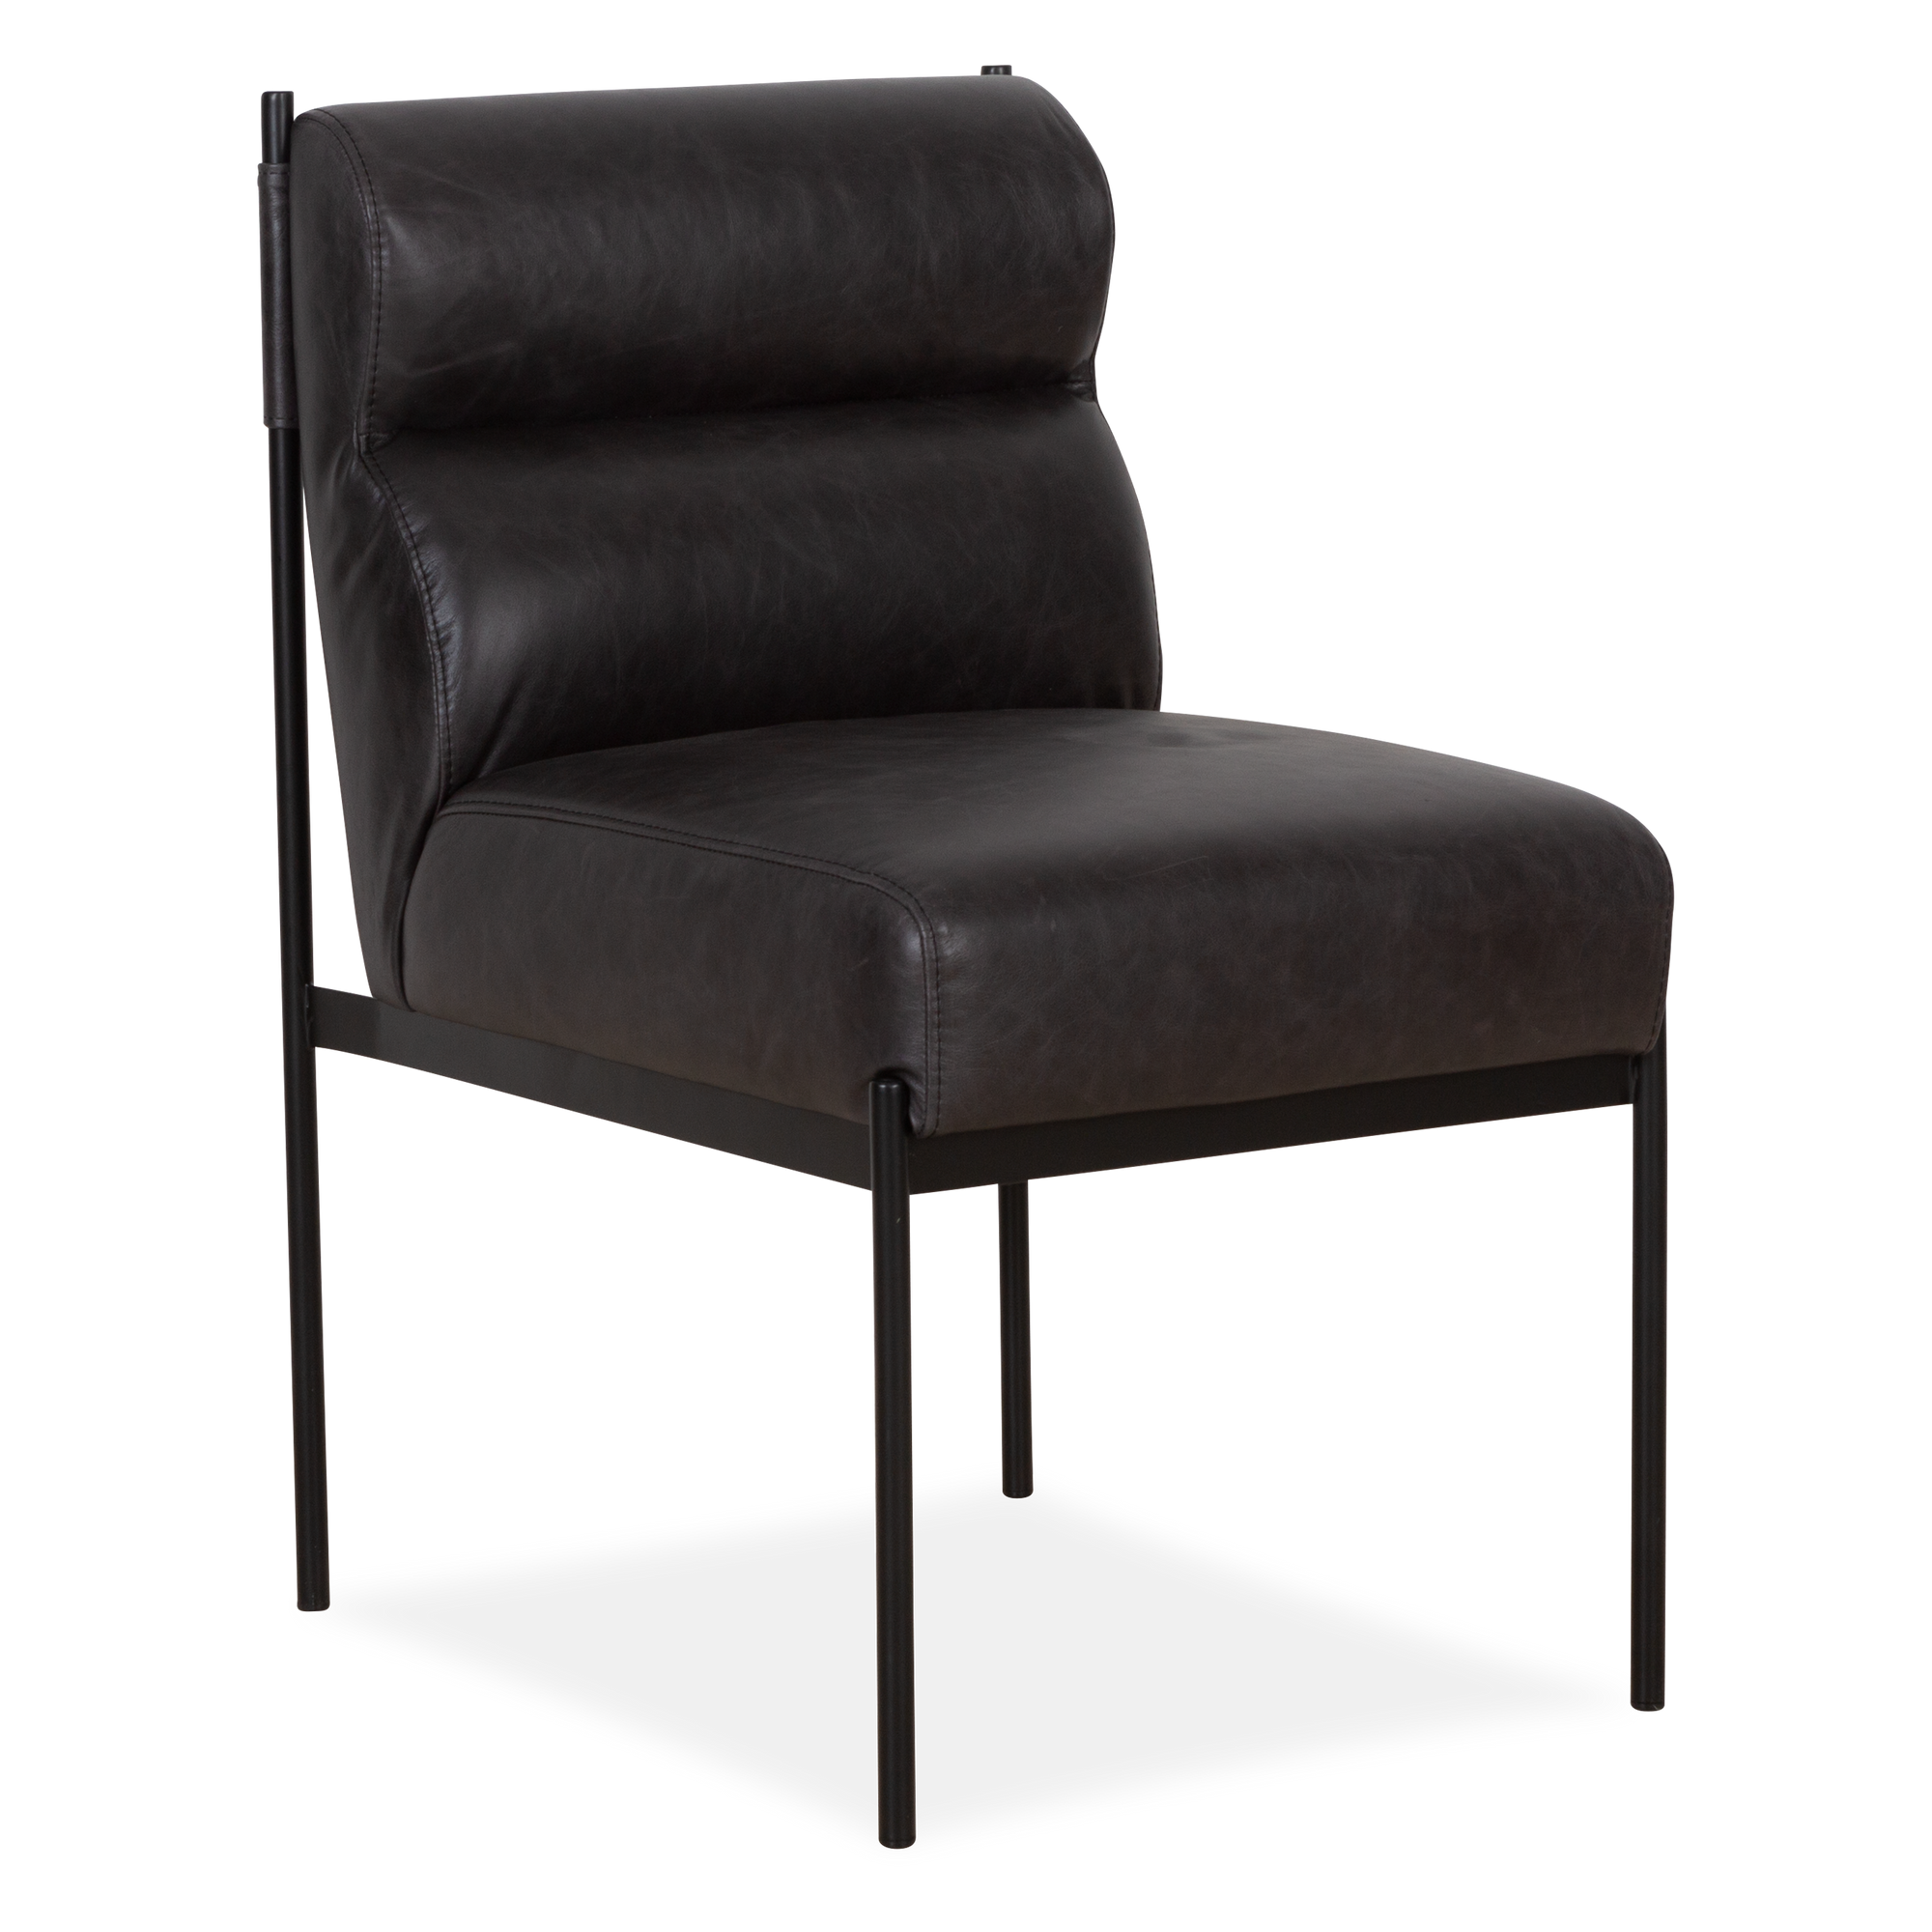 Sleek and sophisticated, the Shaw Chair features buttery top-grain leather with wide channeling for generous comfort, and slim, cage-like framing of black-finished iron for an effo